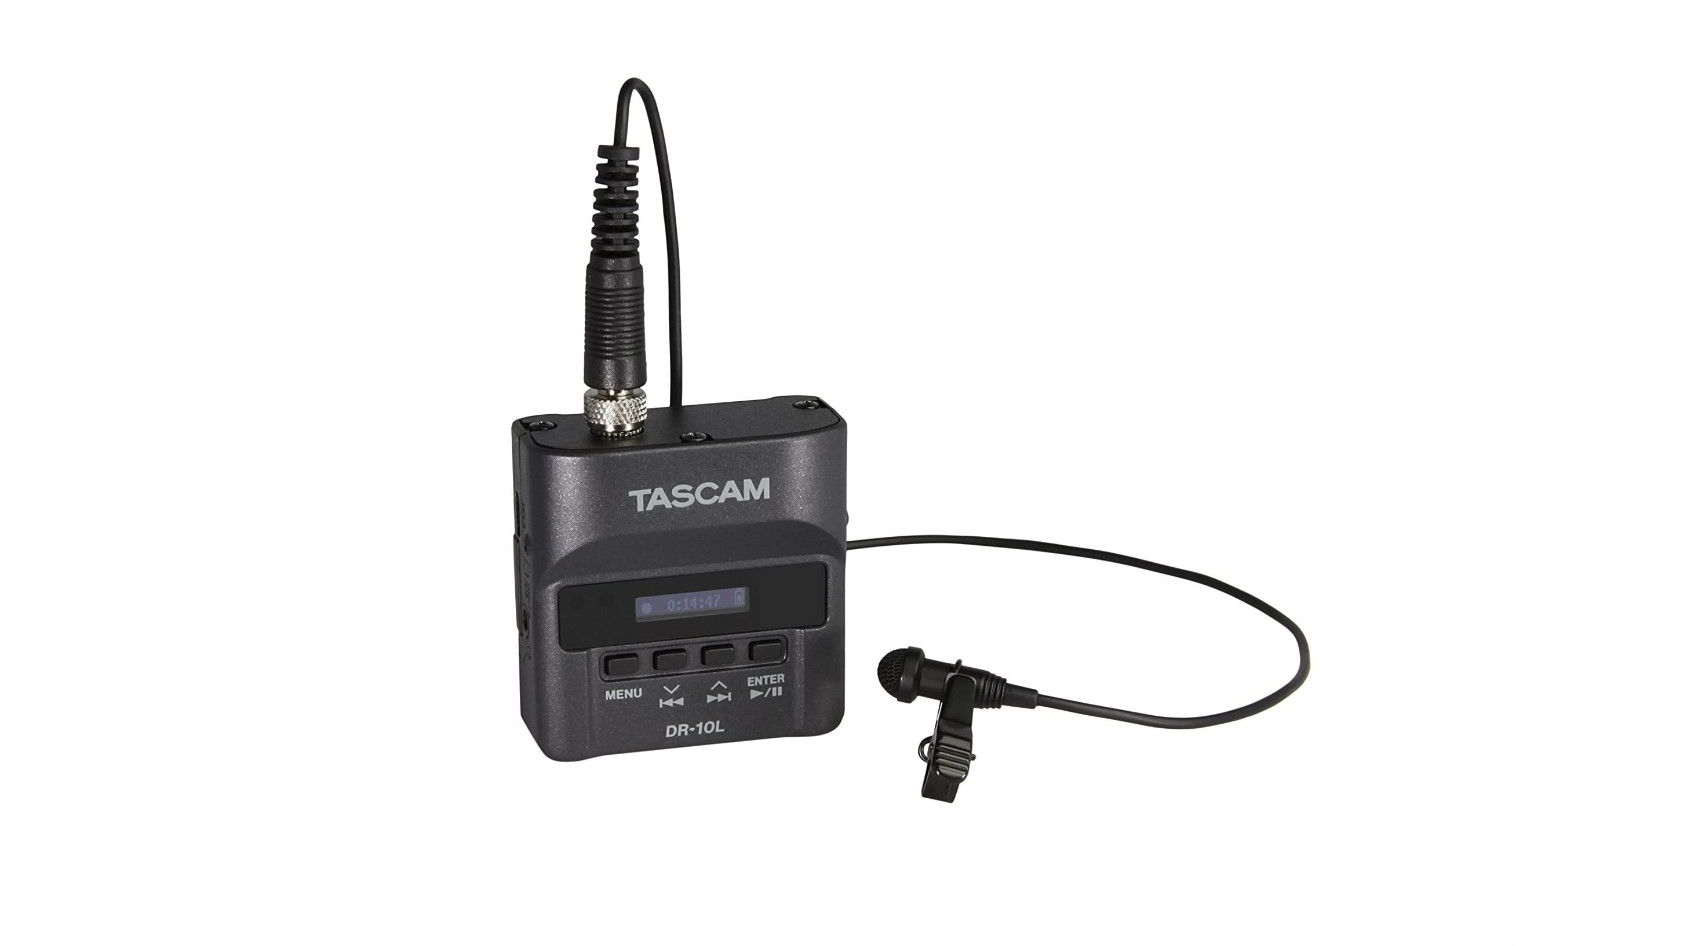 The Tascam DR-10L recorder and lavalier mic shown in black against a white backdrop.